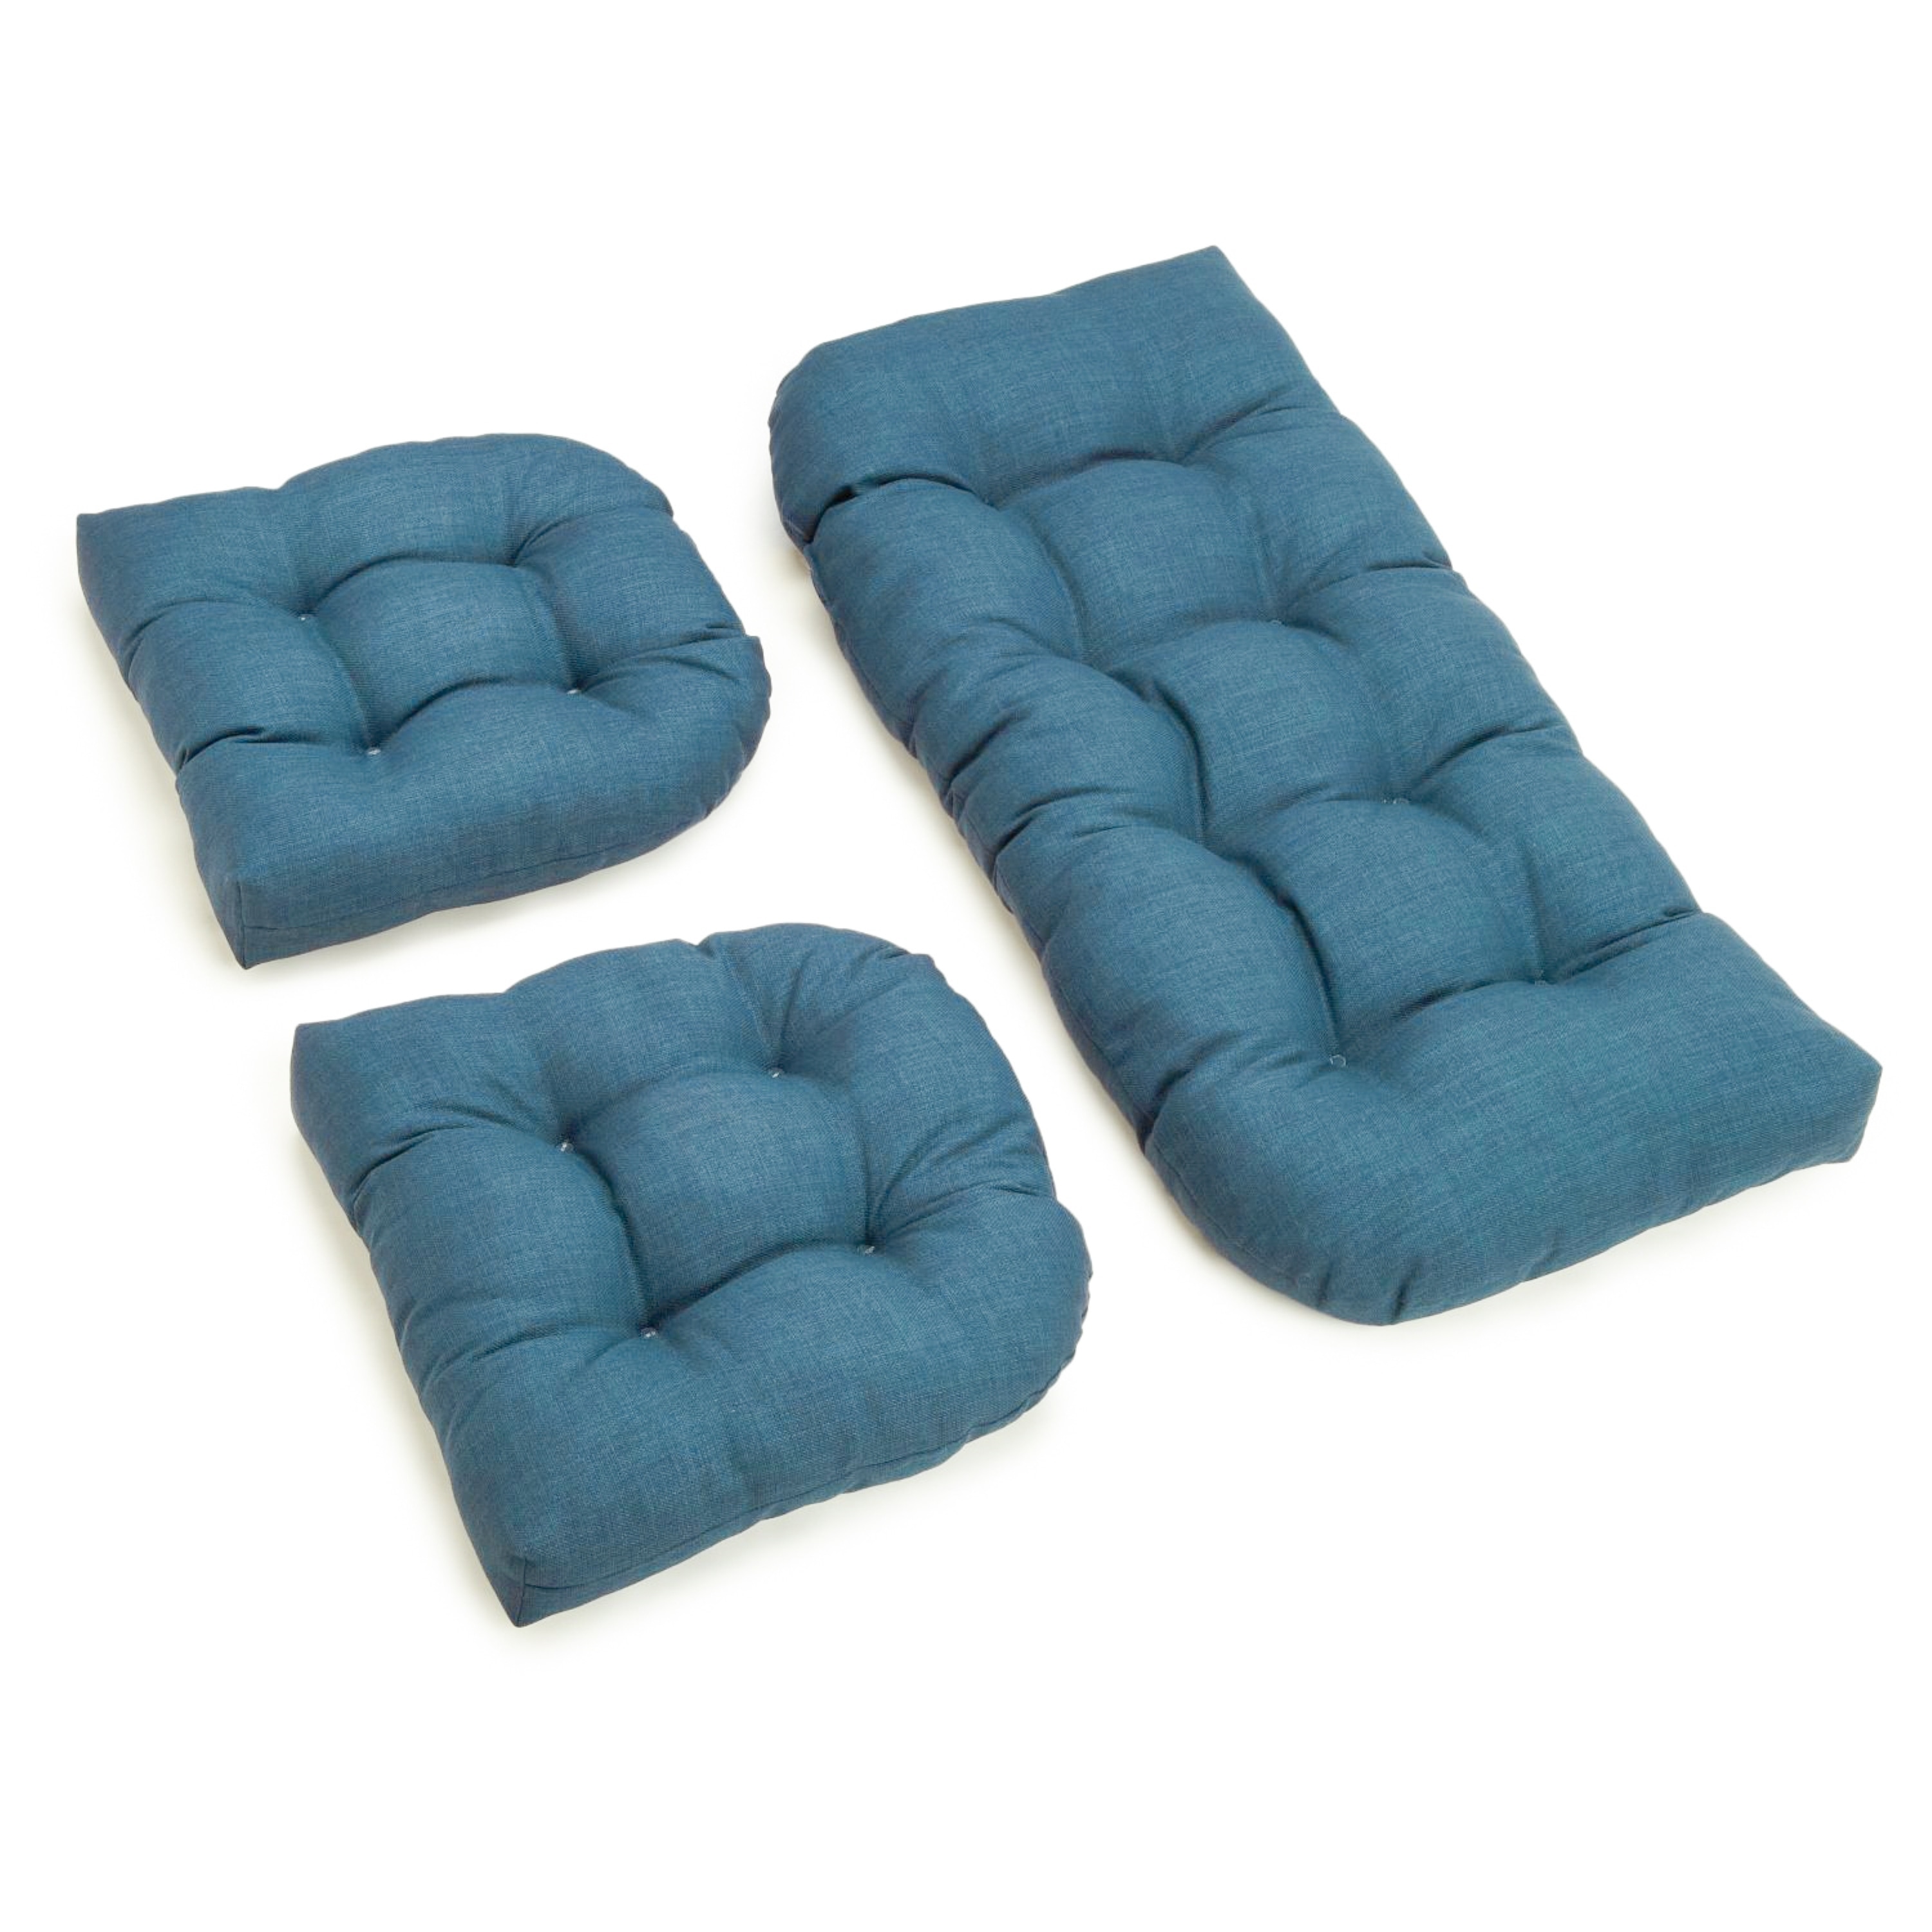 https://ak1.ostkcdn.com/images/products/is/images/direct/22ad76d9d8d6bd06317d353f8b8d17f935f0a59f/Tufted-Outdoor-Settee-Cushion-Set-%28Set-of-3%29.jpg